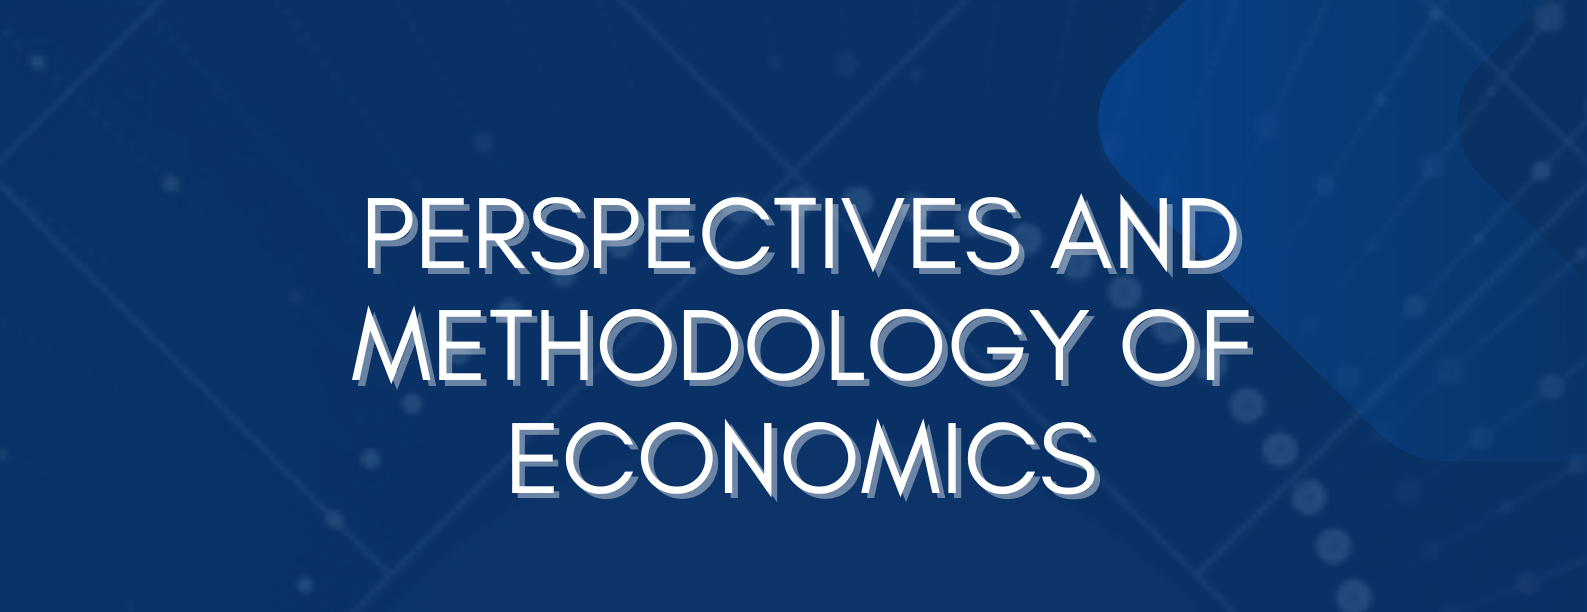 PERSPECTIVES AND METHODOLOGY OF ECONOMICS 